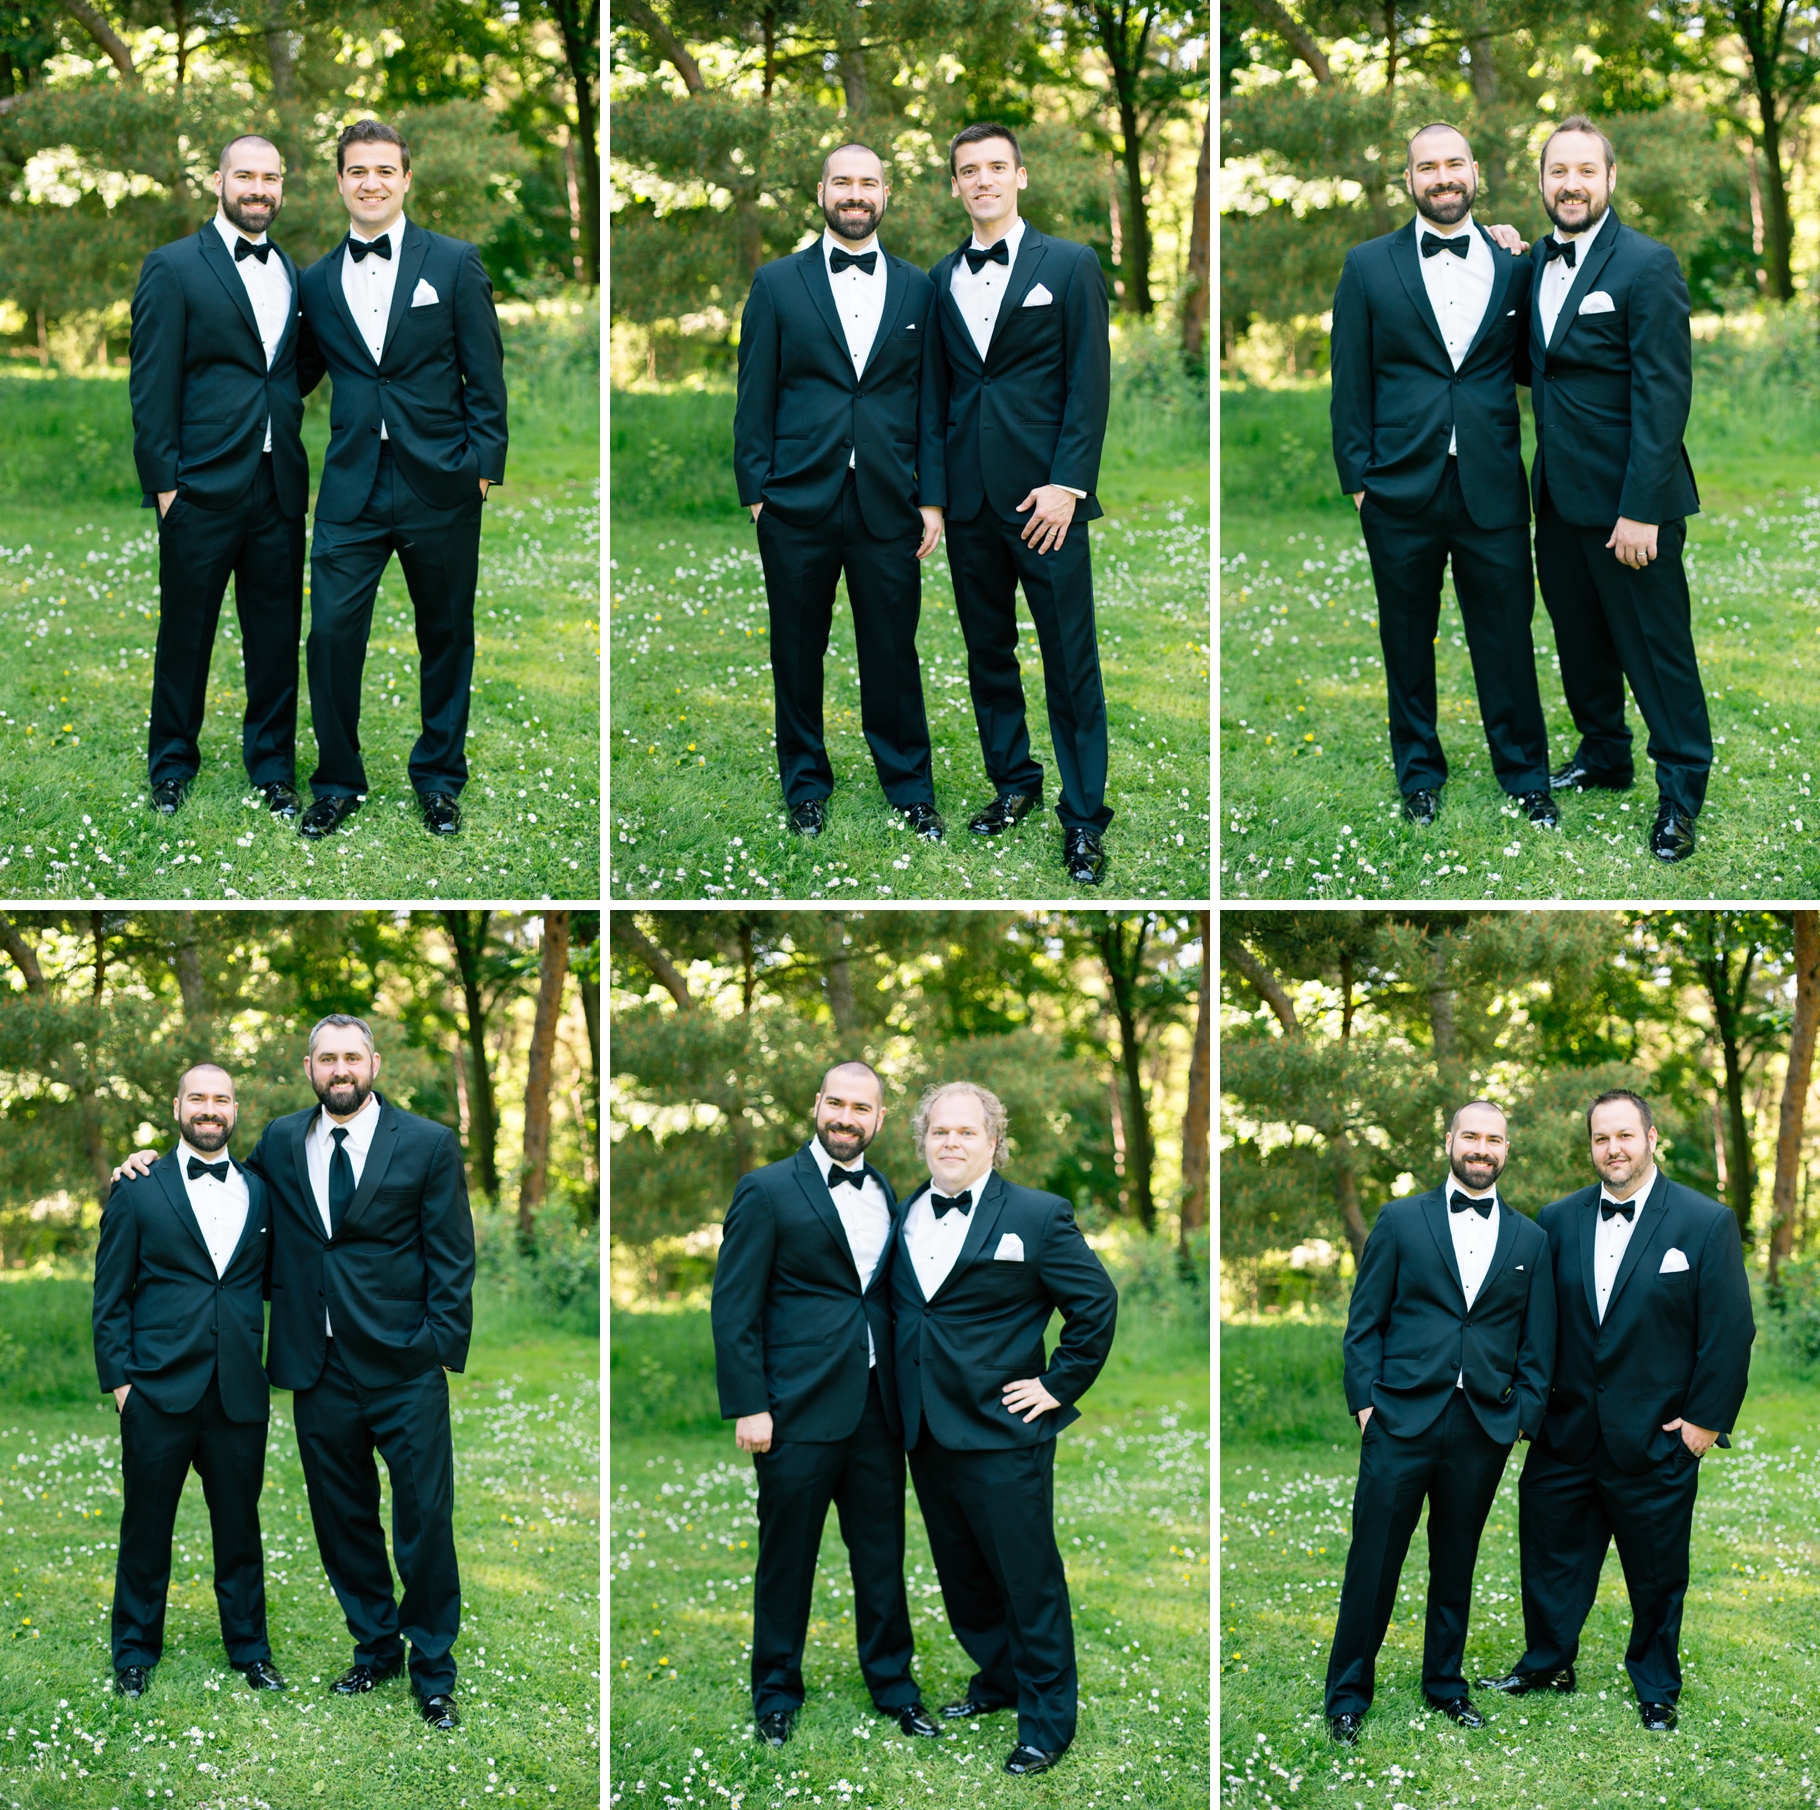 29-Groomsmen-Portraits-Groom-Black-Suits-Classic-Style-Woodland-Park-Seattle-Wedding-Photographer-Photography-by-Betty-Elaine